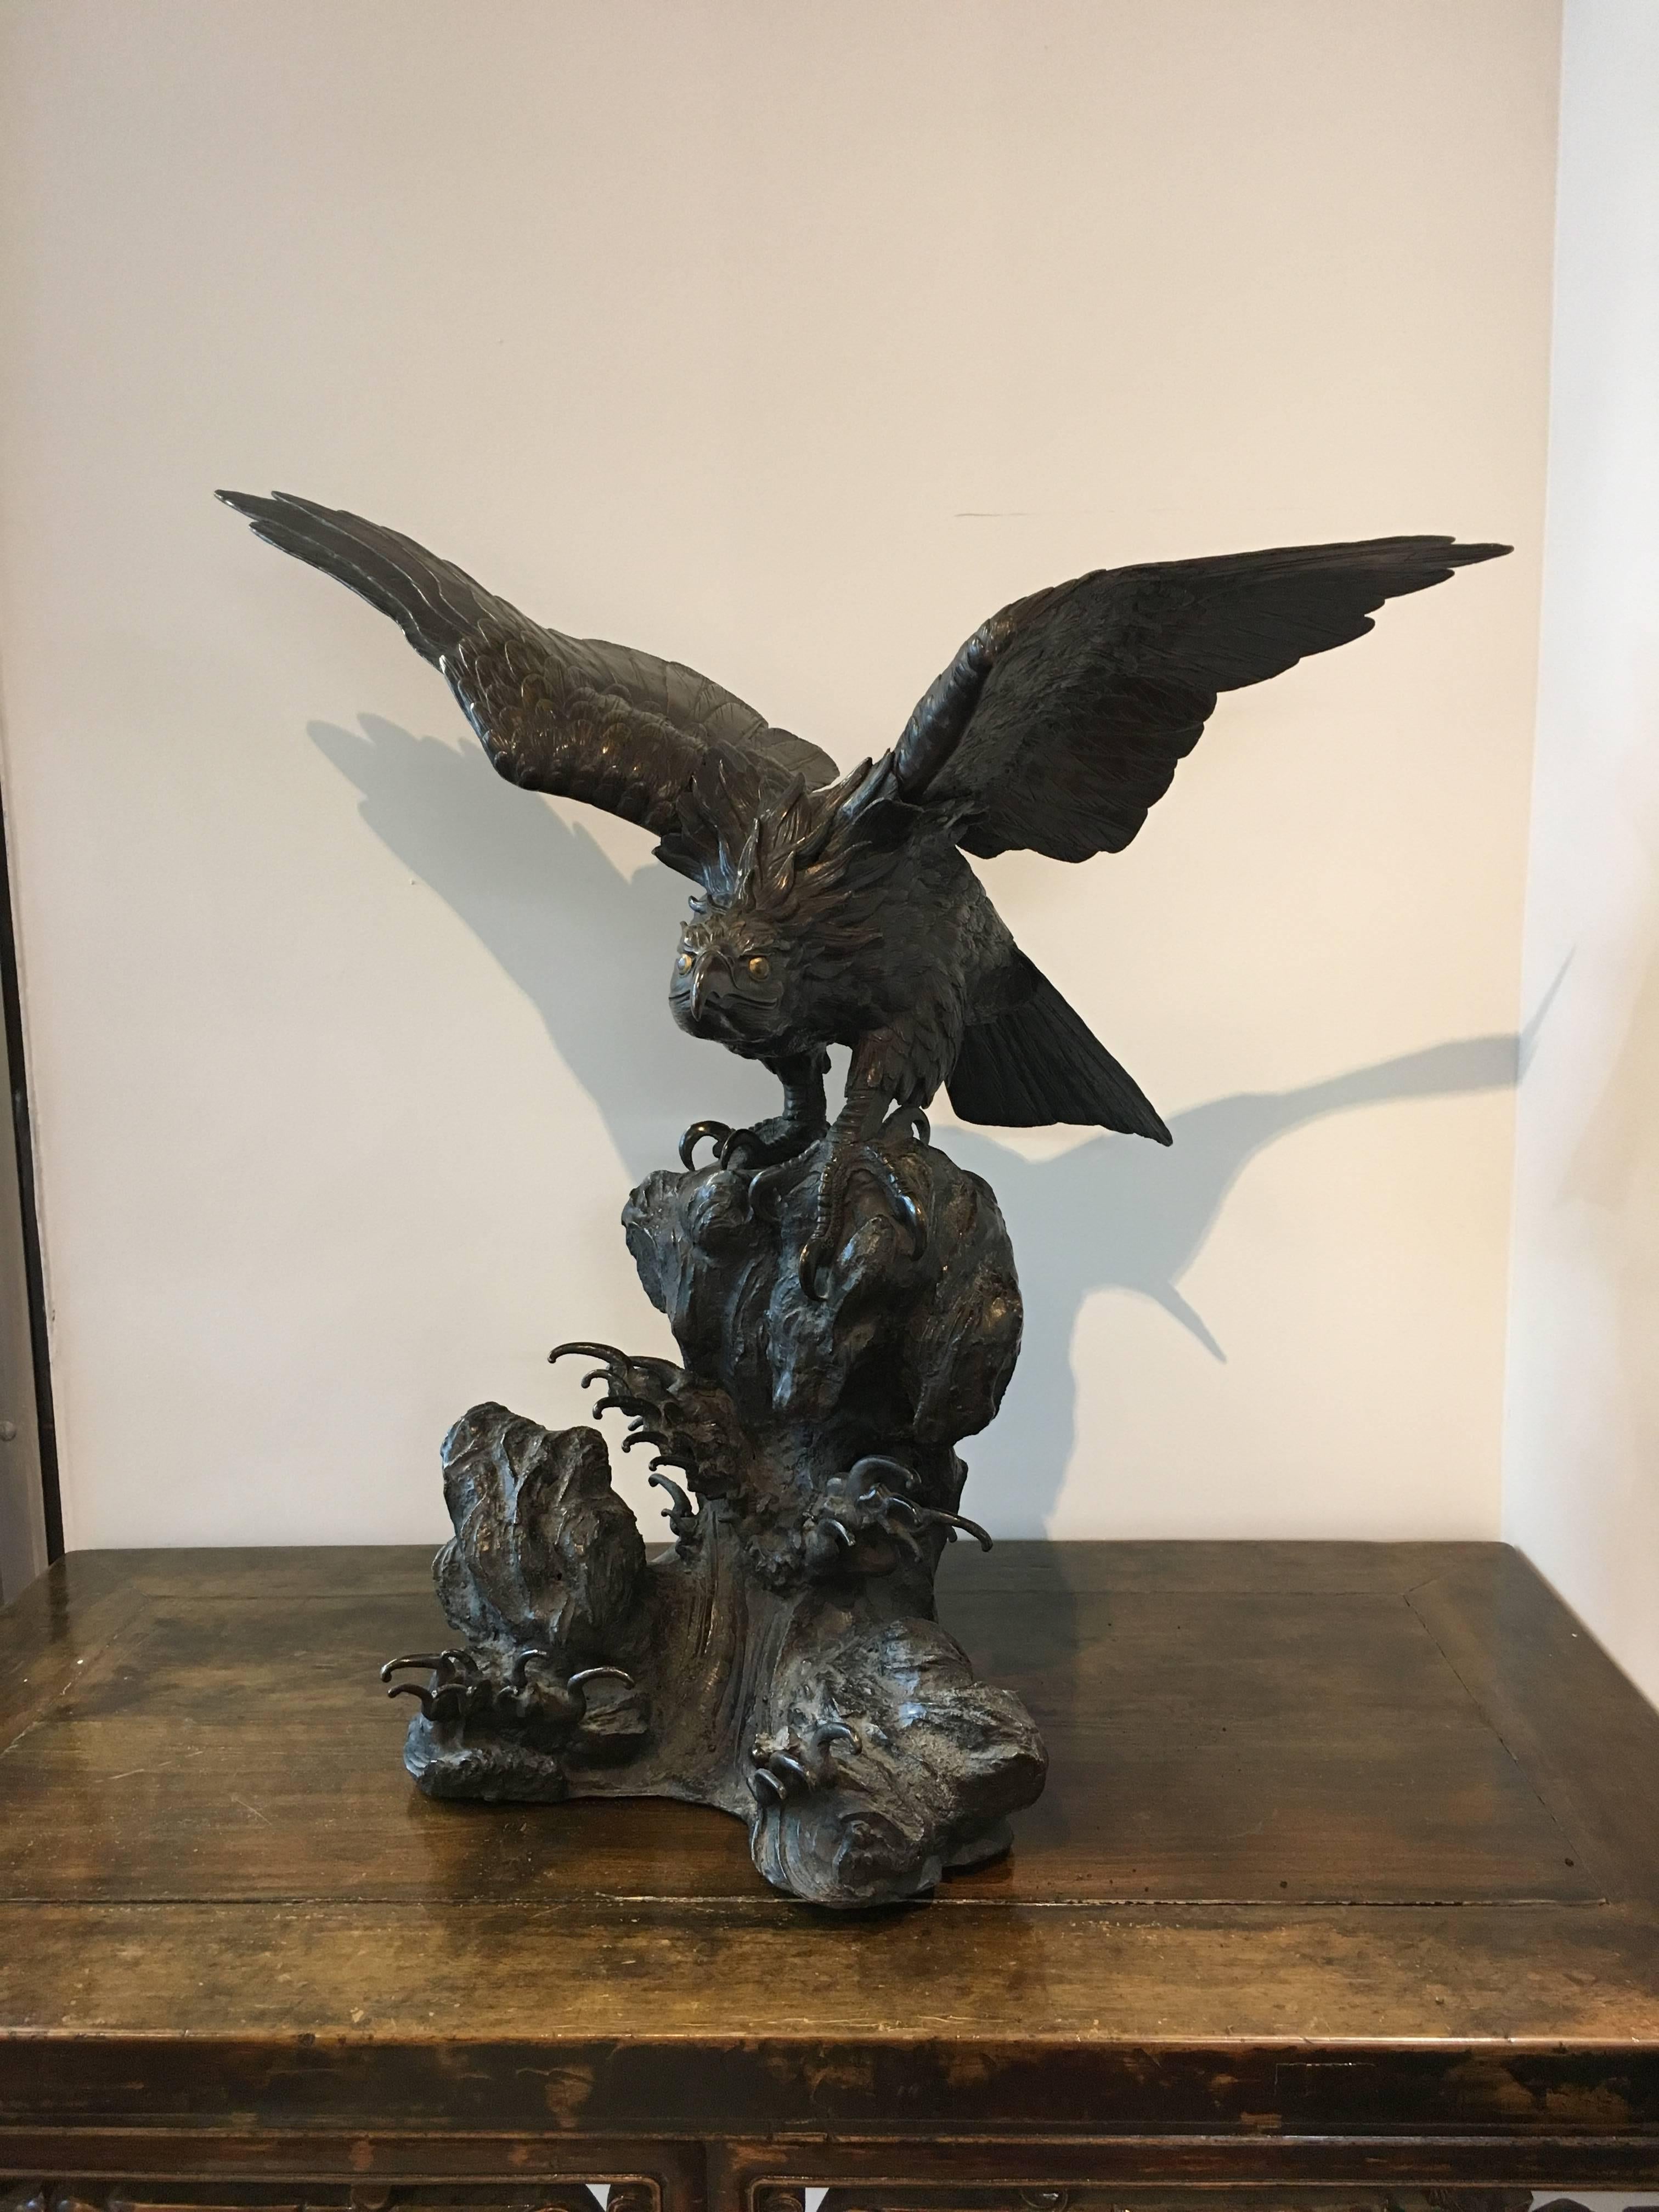 A large and powerful Japanese cast bronze model of an eagle.
The raptor is portrayed perched on a rocky outcrop, with waves crashing beneath. The bird of prey crouched down with wings outstretched, about to take off. Head down, an intense look in